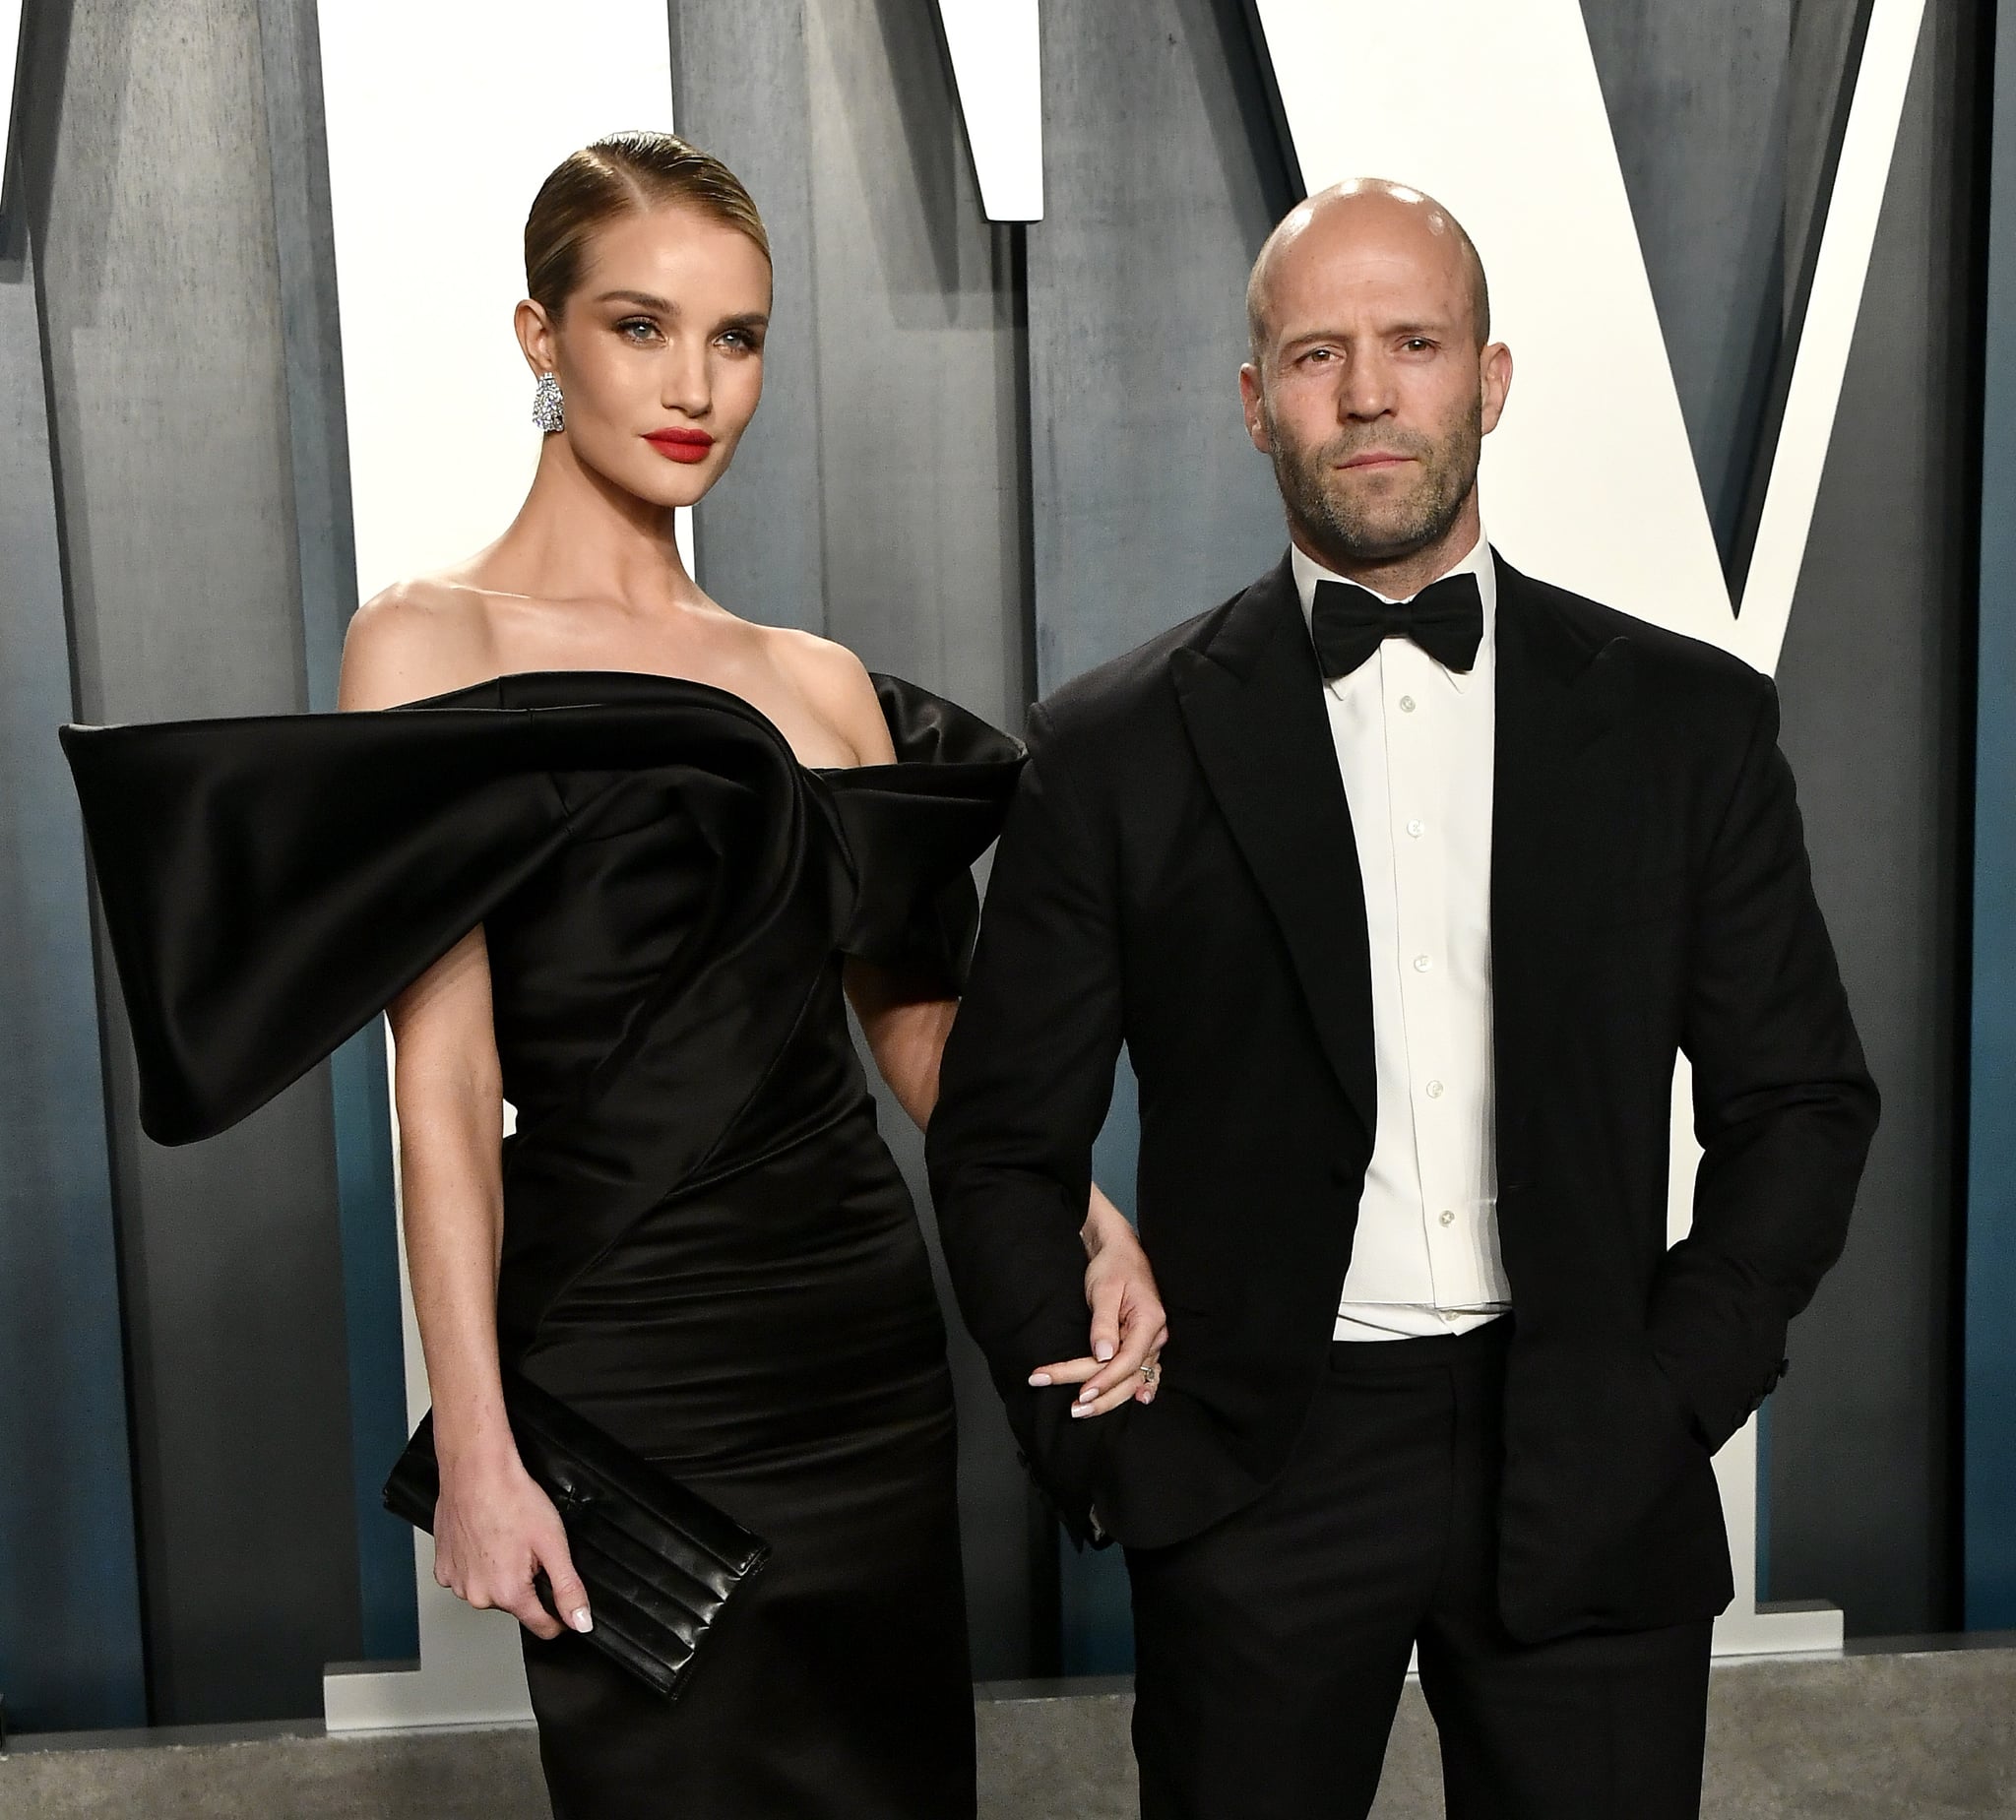 BEVERLY HILLS, CALIFORNIA - FEBRUARY 09: Rosie Huntington-Whiteley and Jason Statham attend the 2020 Vanity Fair Oscar Party hosted by Radhika Jones at Wallis Annenberg Centre for the Performing Arts on February 09, 2020 in Beverly Hills, California. (Photo by Frazer Harrison/Getty Images)